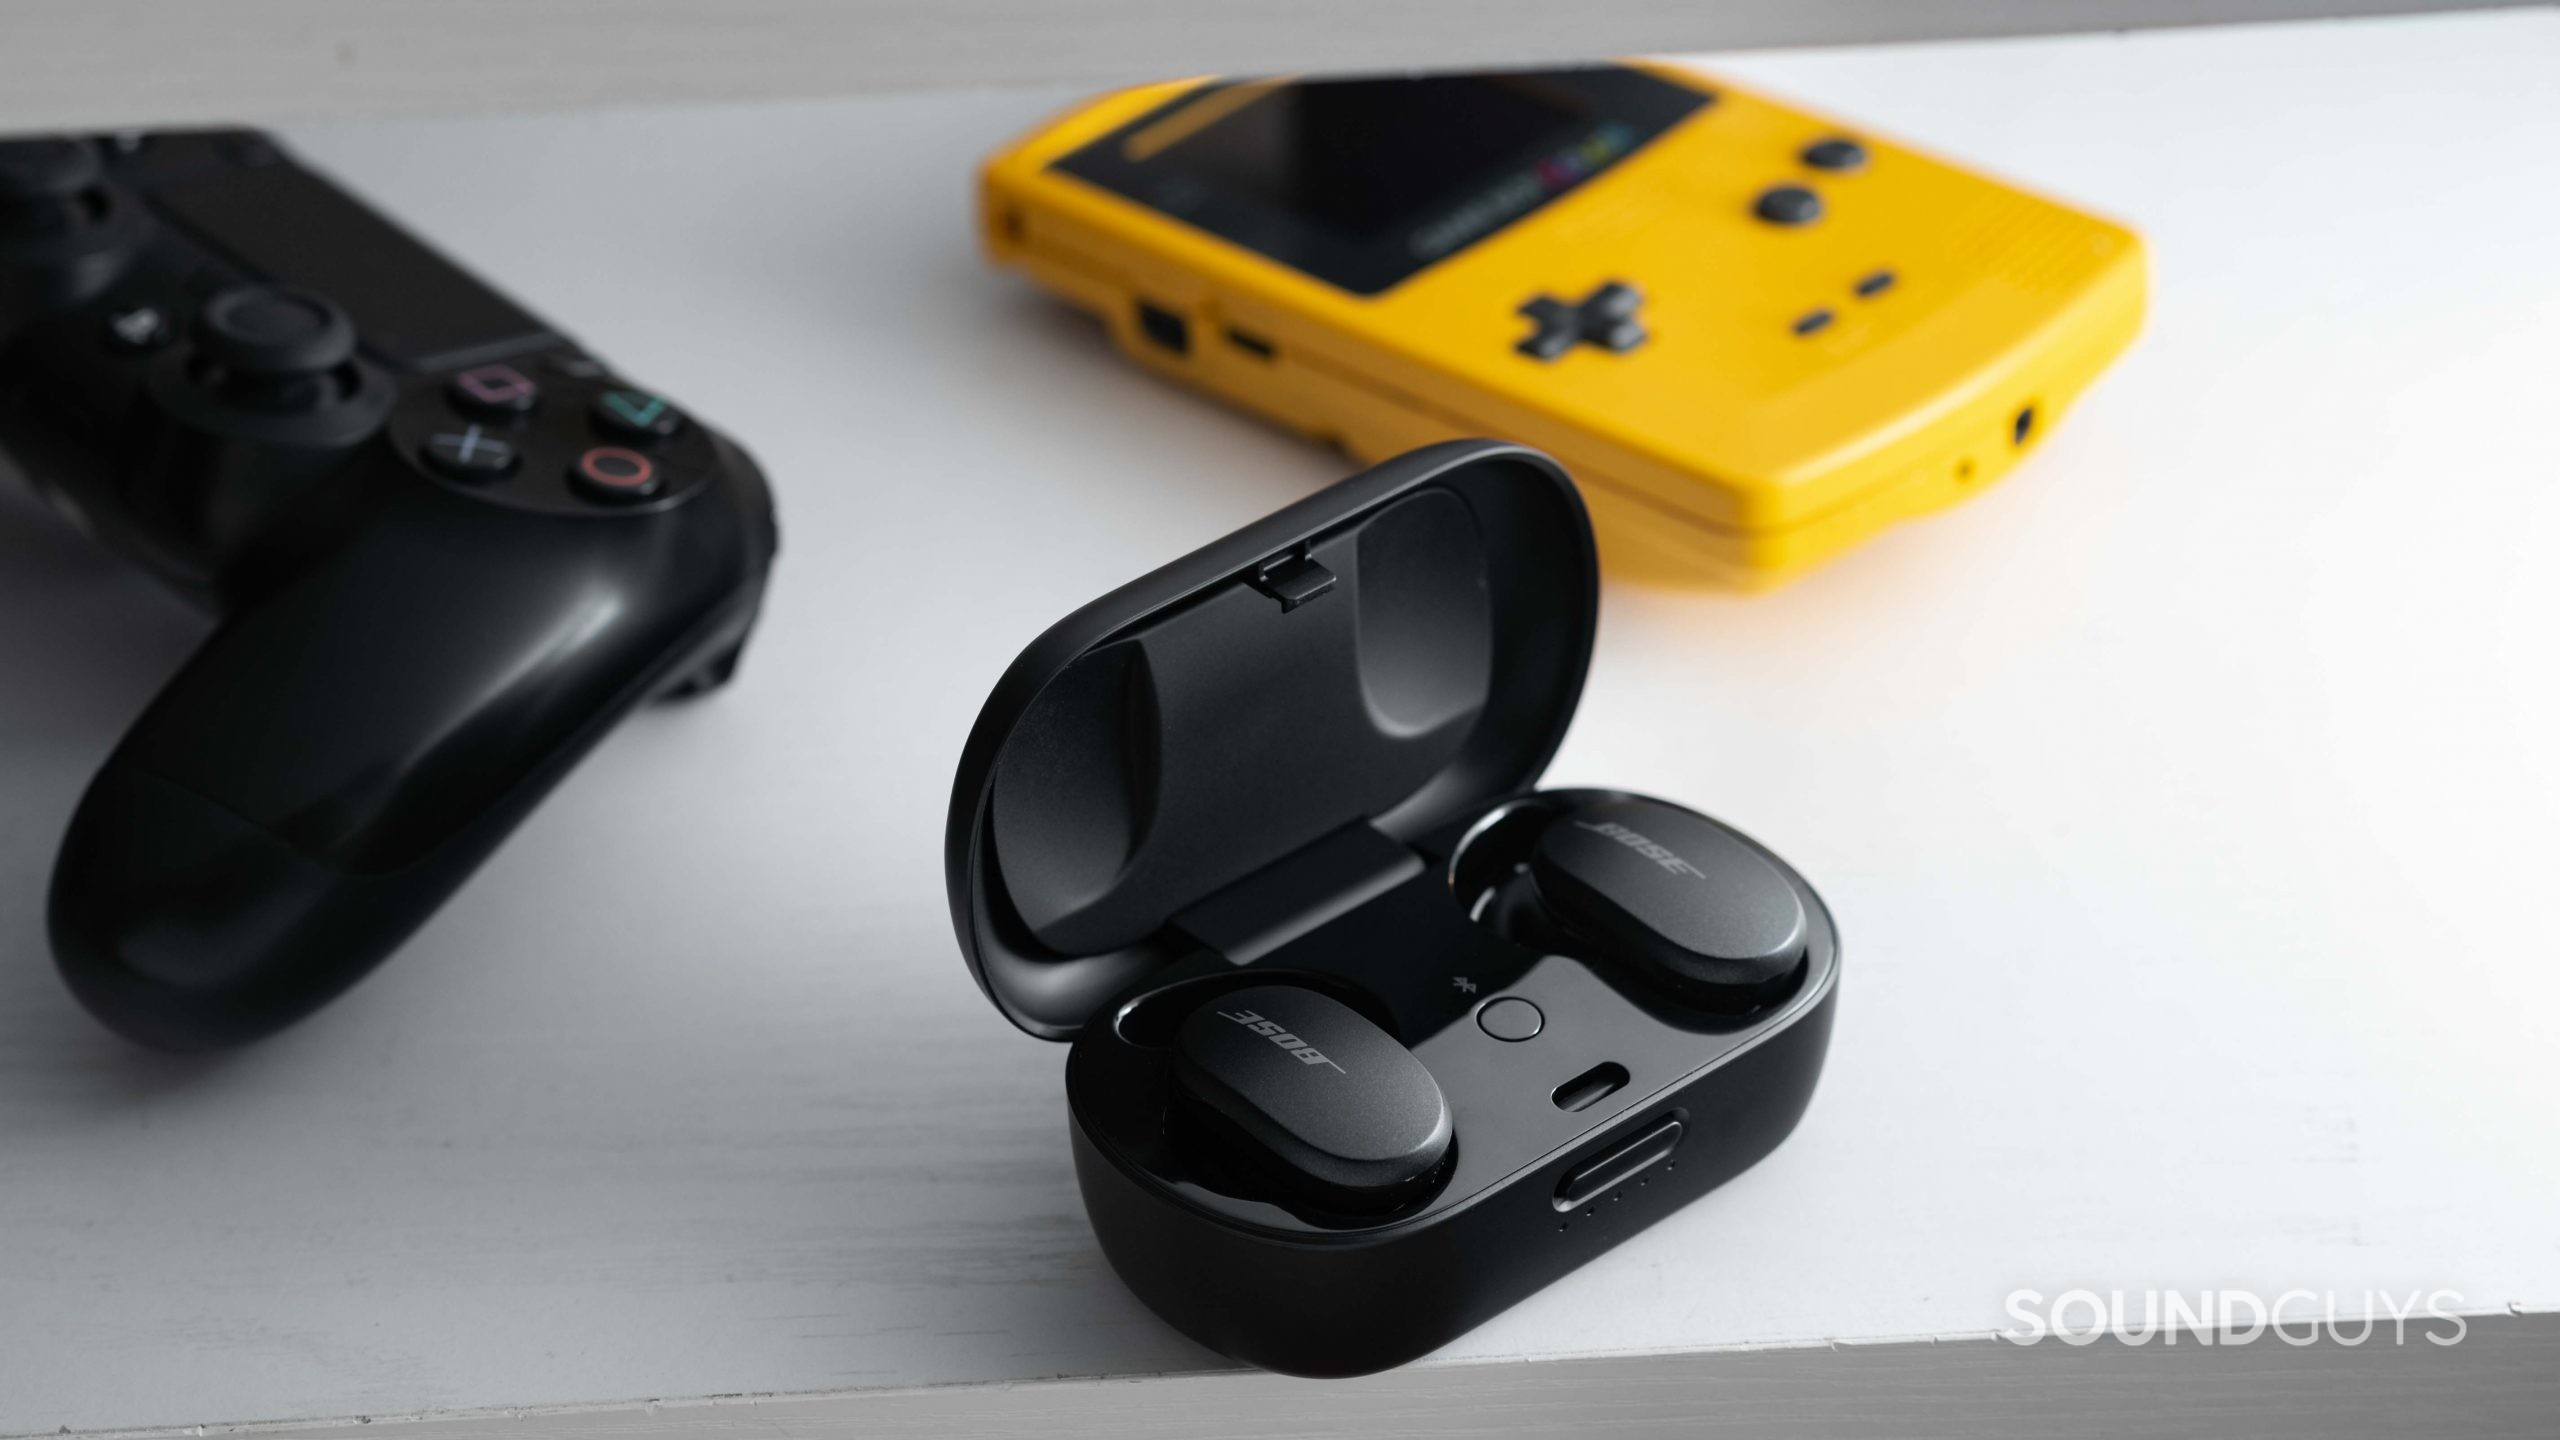 The Bose QuietComfort Earbuds noise canceling true wireless earbuds in the USB-C charging case next to a Gameboy Color and PlayStation 4 controller.